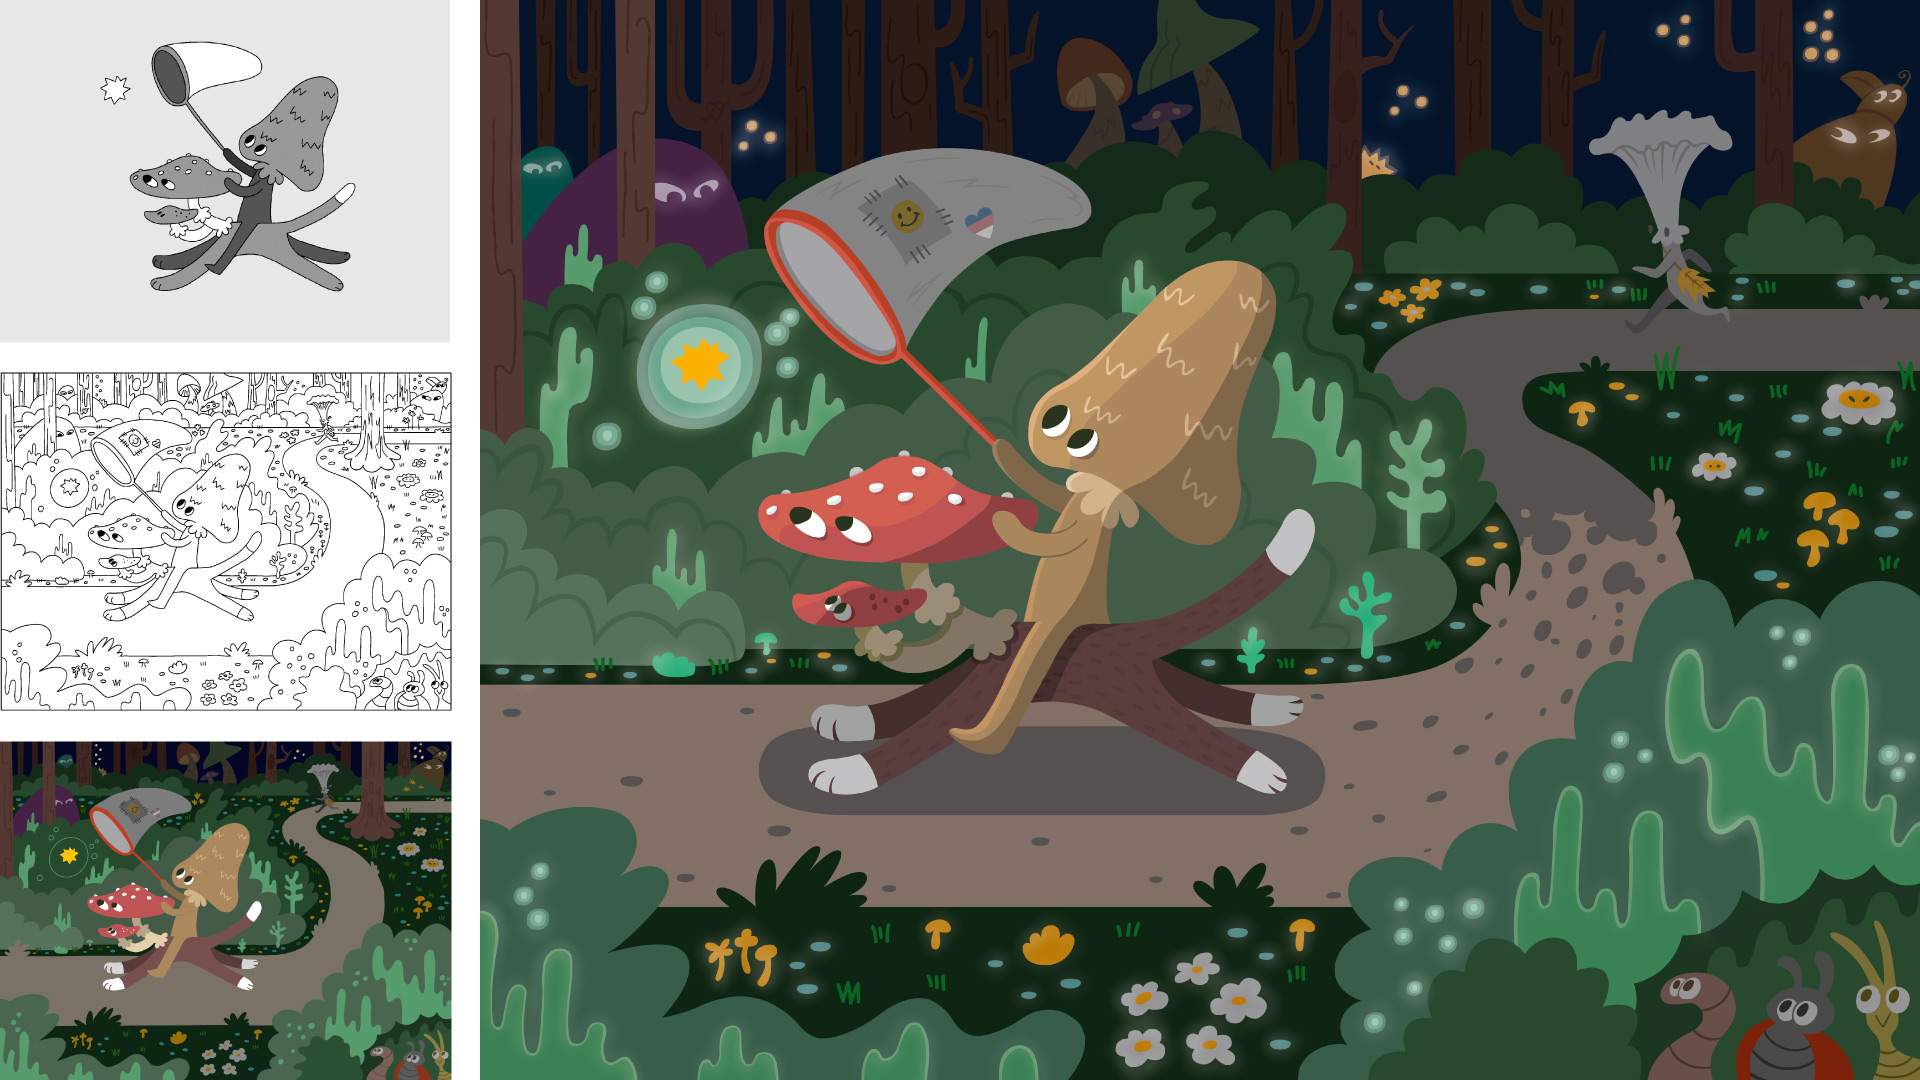 Illustration of mushroom characters in a forest and process work.